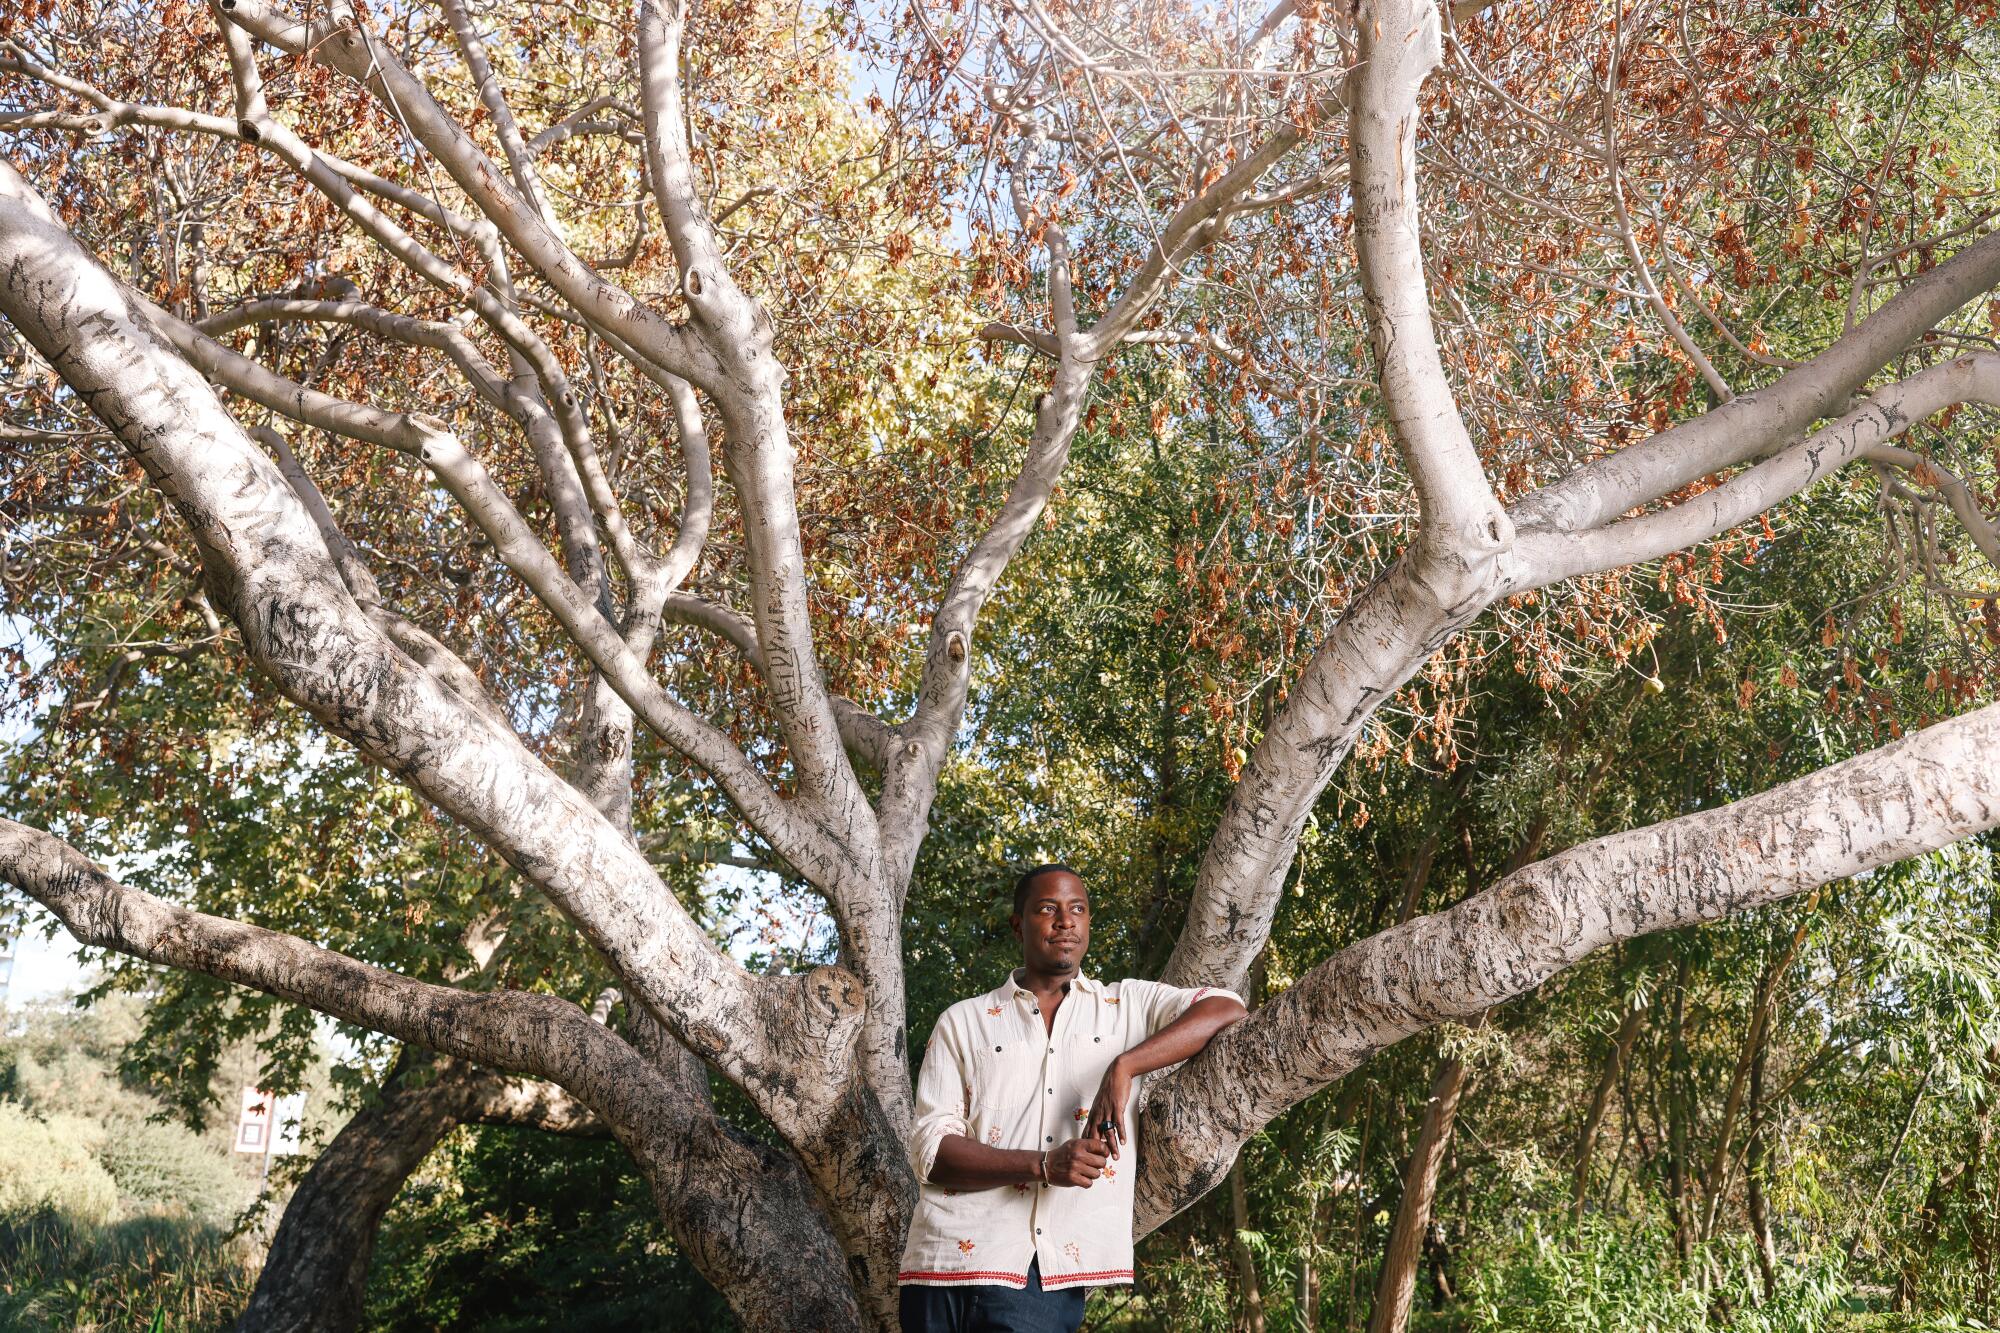 Artist Sanford Biggers, wearing a cream-colored shirt trimmed in red, stands amid the branches of a tree in a park.